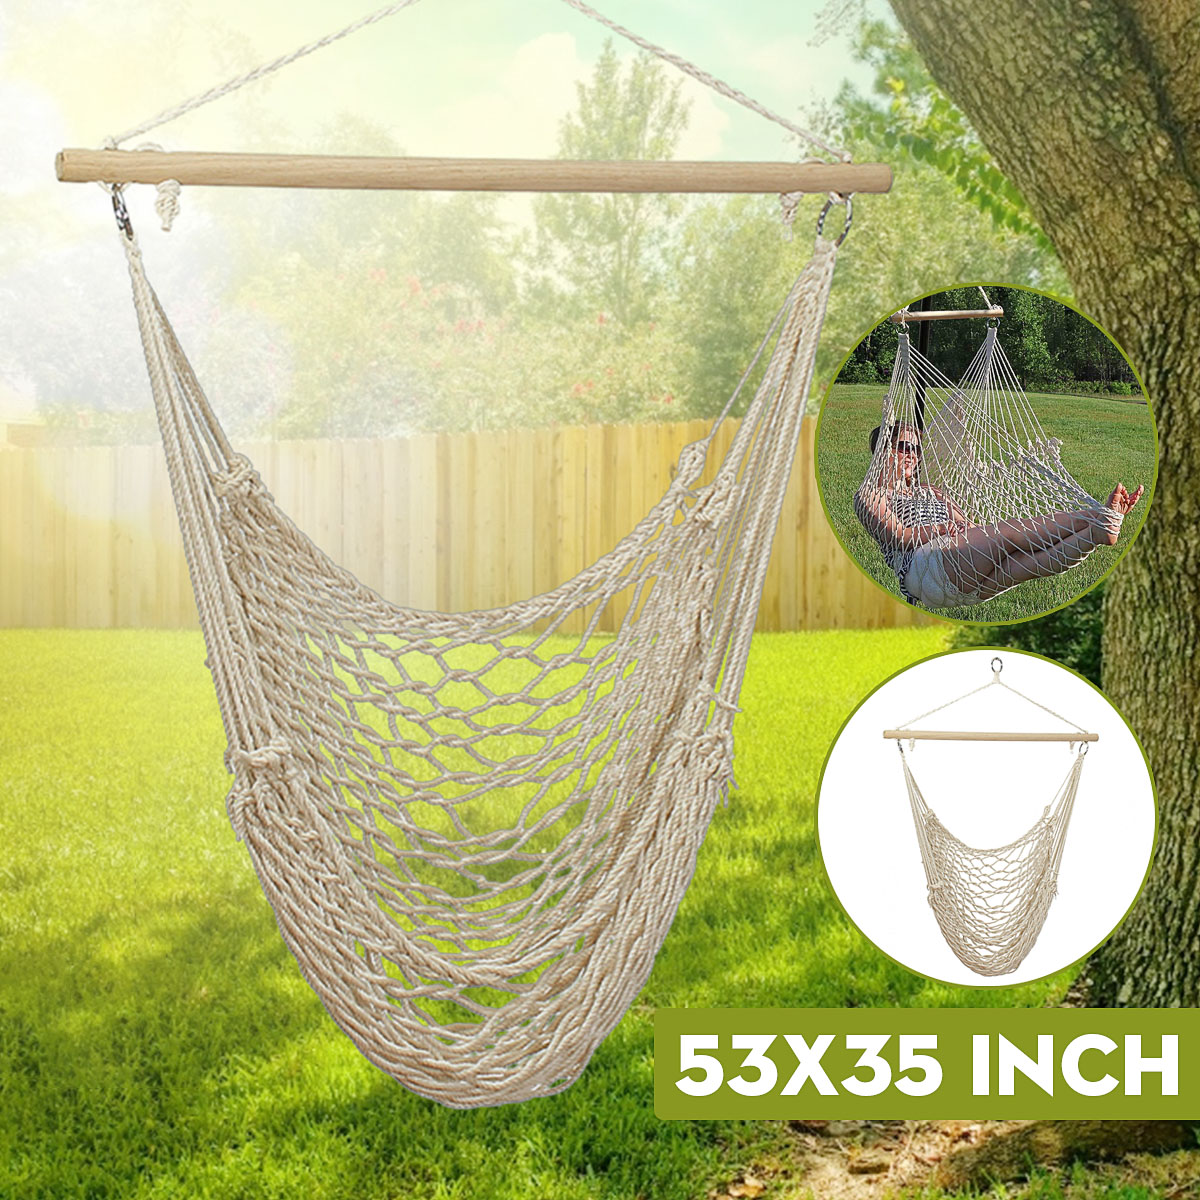 135-x-90CM-Portable-Outdoor-Swing-Cotton-Hammock-Chair-Wooden-Bar-Hanging-Rope-Chair-For-Garden-Pati-1304667-1